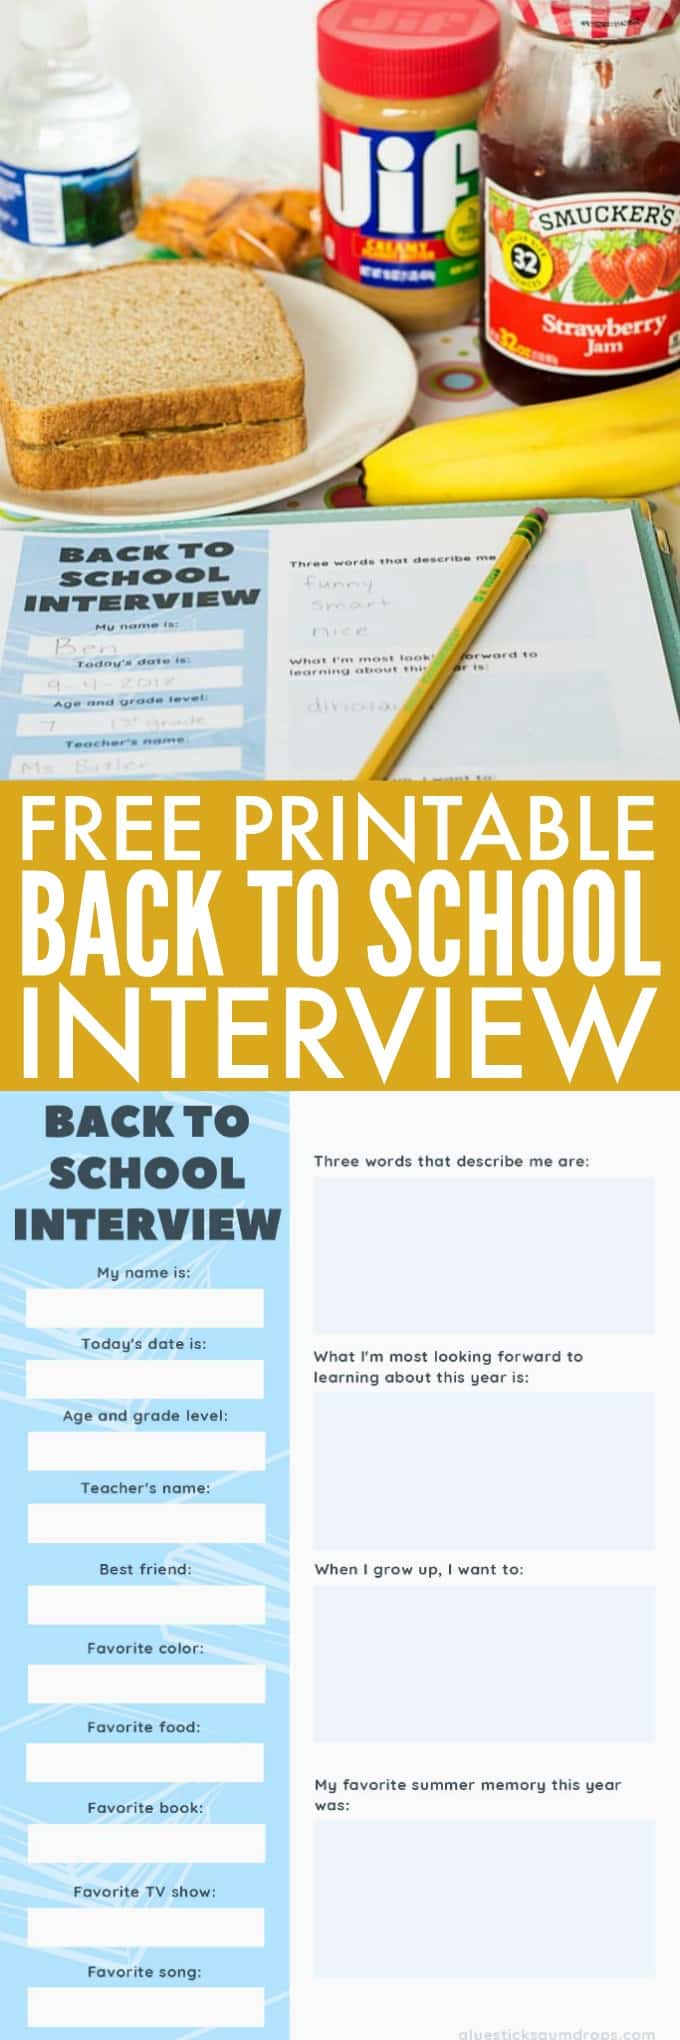 Free Printable Back to School Interview